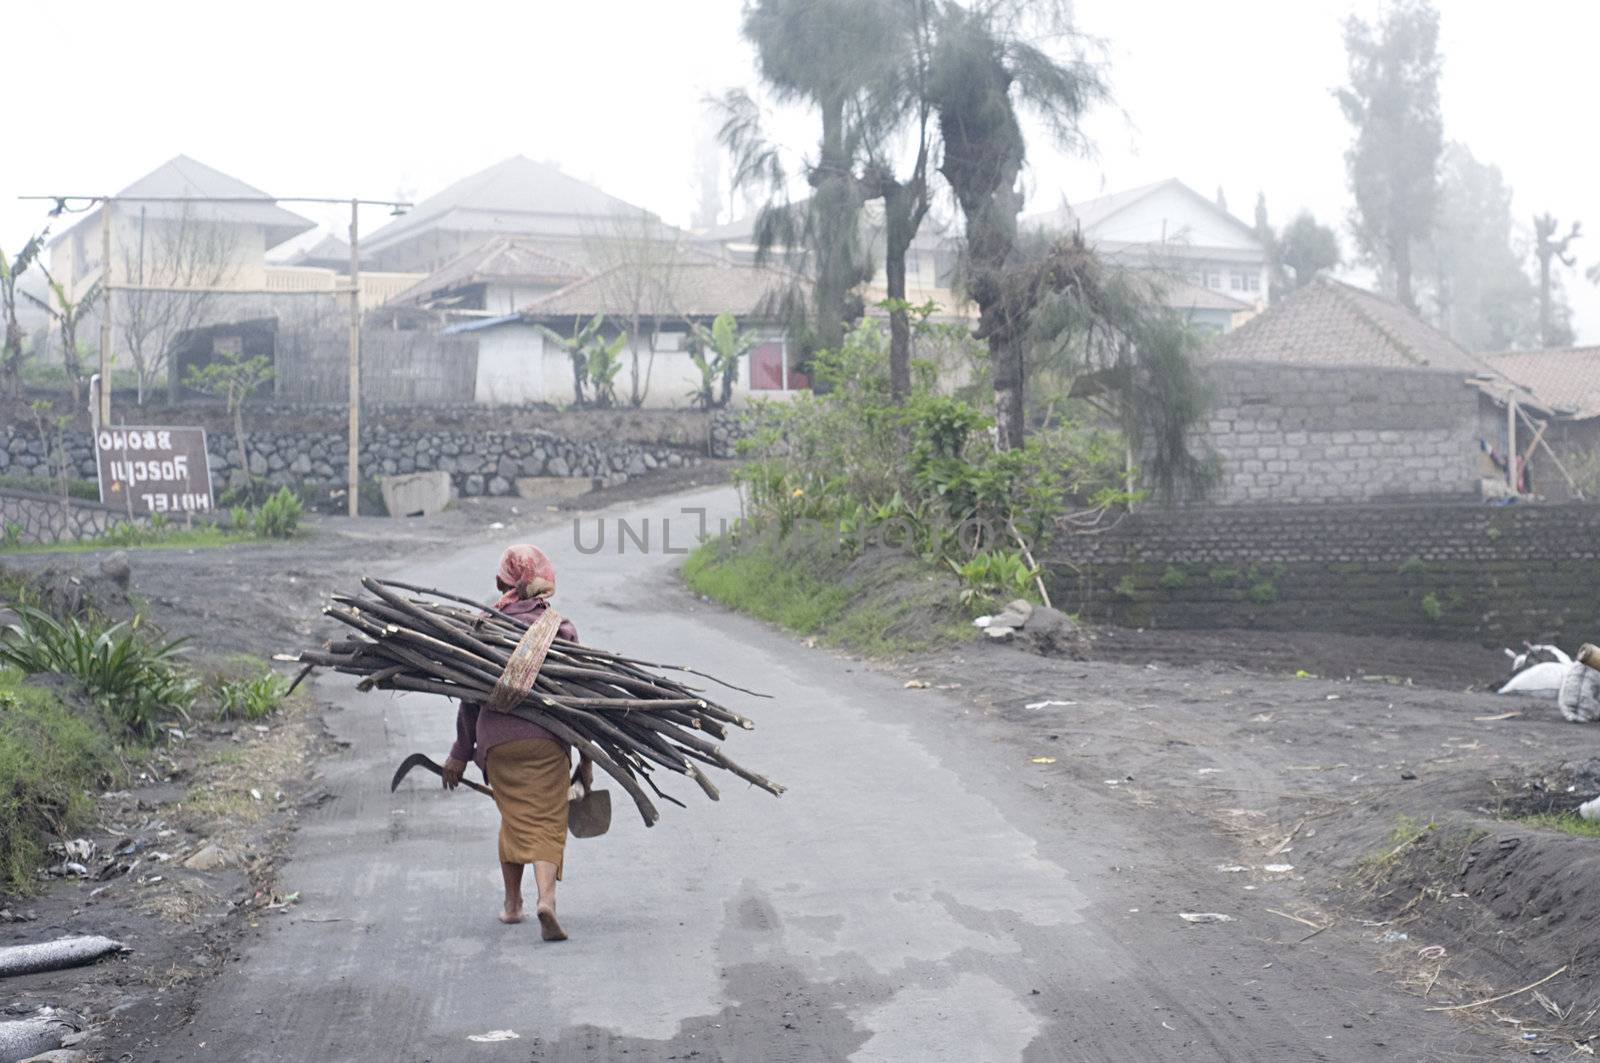 Sukapura, Indonesia - April 24, 2011: Indonesian woman carrying firewood on the way to her home